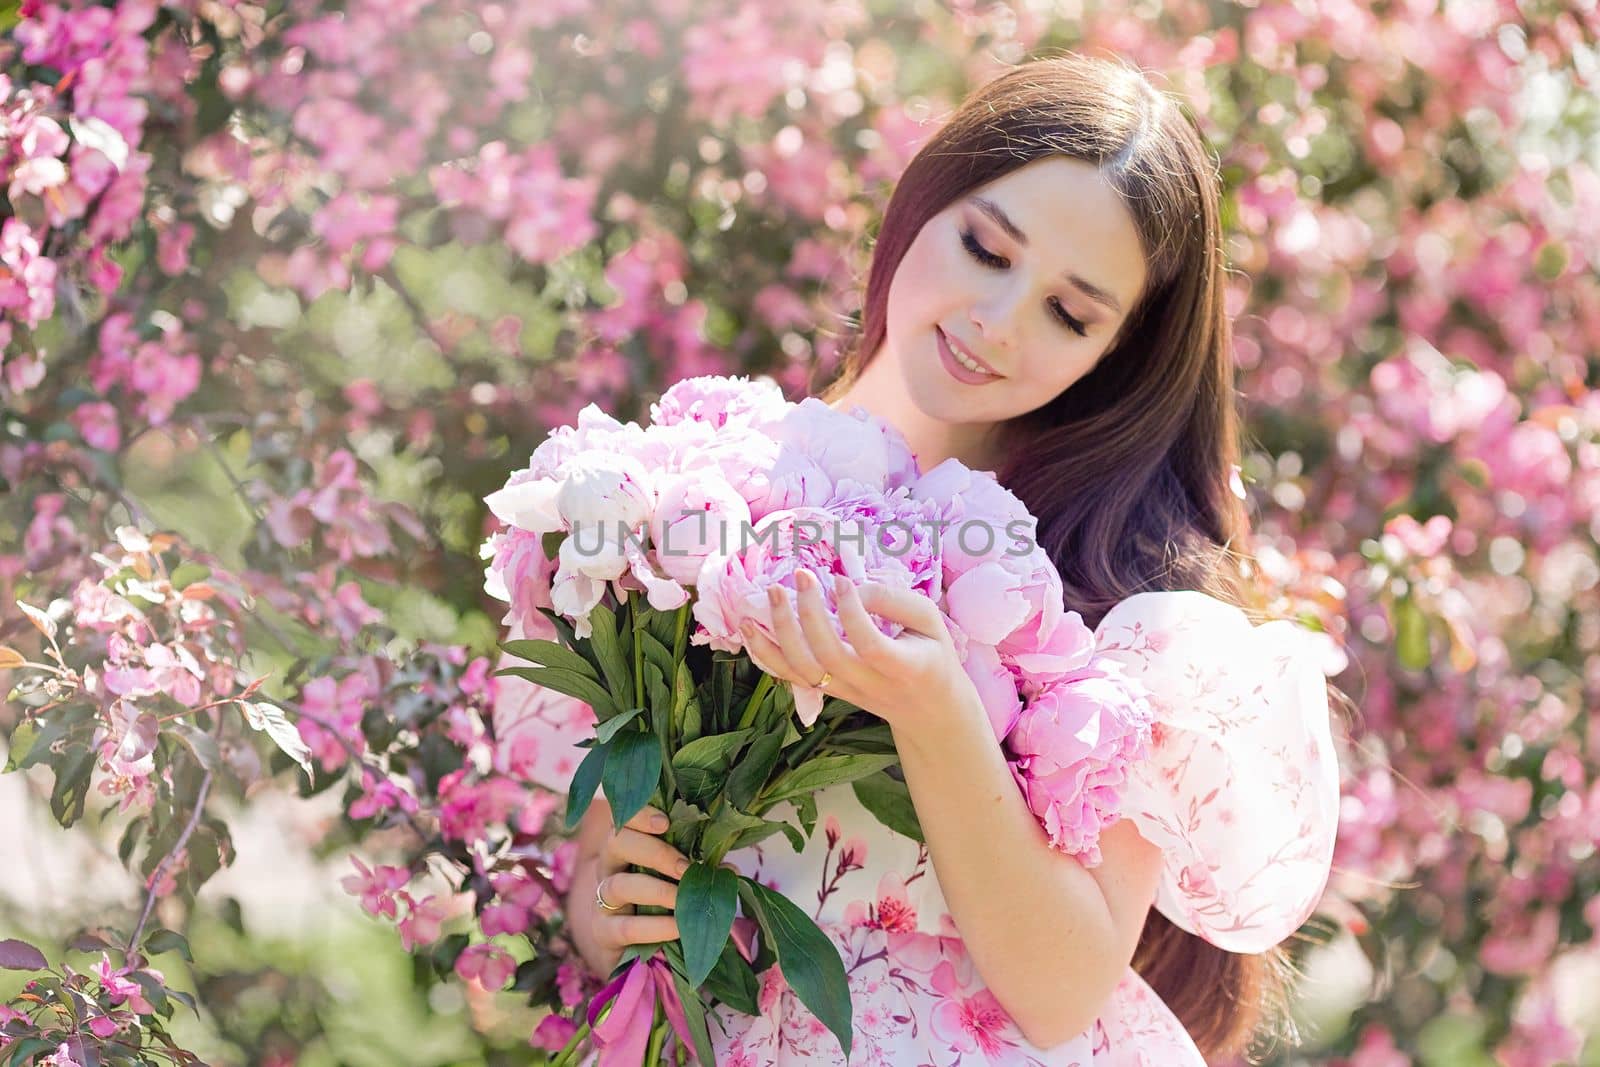 A happy brunette in a light pink dress, with a large bouquet of pink peonies, stands near pink blooming apple trees, in summer in the garden on a sunny day, a space for copying